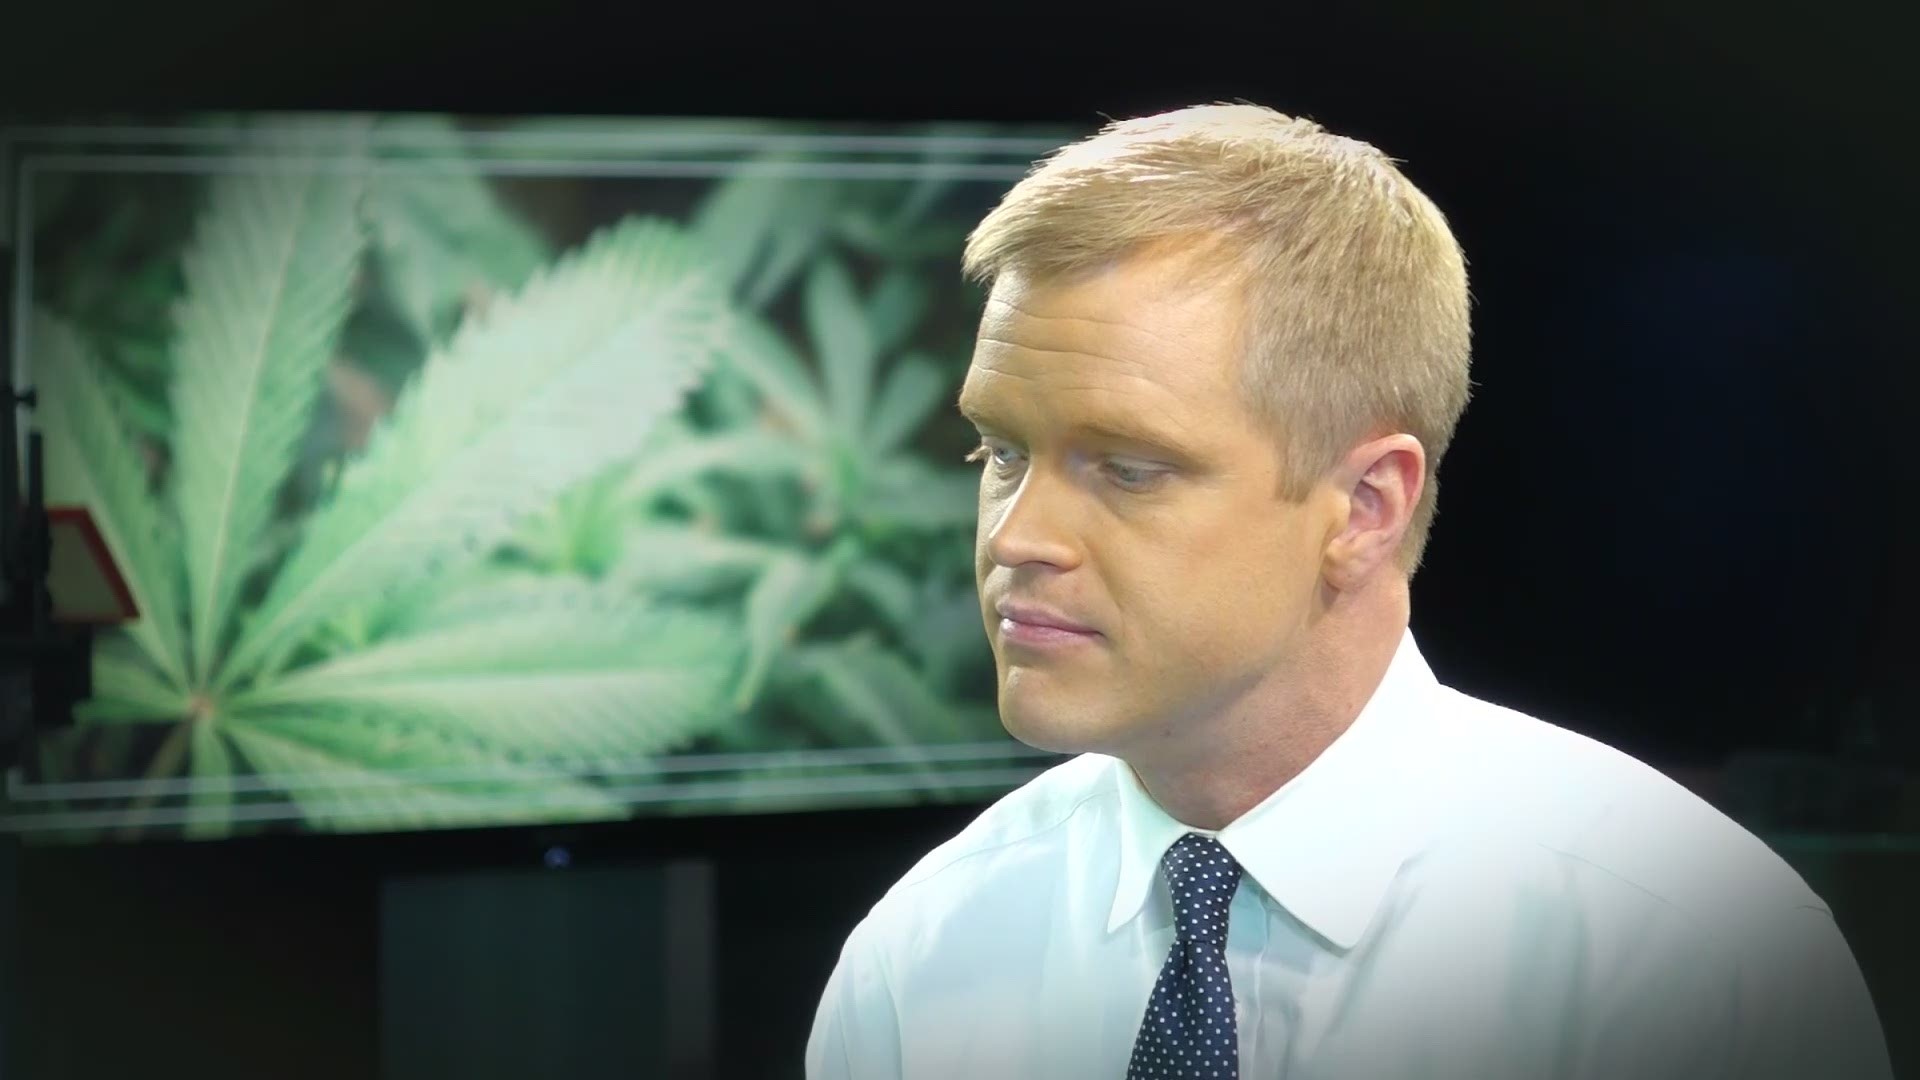 We sat down with Crystal Peoples-Stokes, member of the state Assembly, Jodie Altman, campus director of Kids Escaping Drugs, and Dr. Laszlo Mechtler, neurologist and Medical Director at Dent Neurologic Institute, to get their take on legalized recreational marijuana.